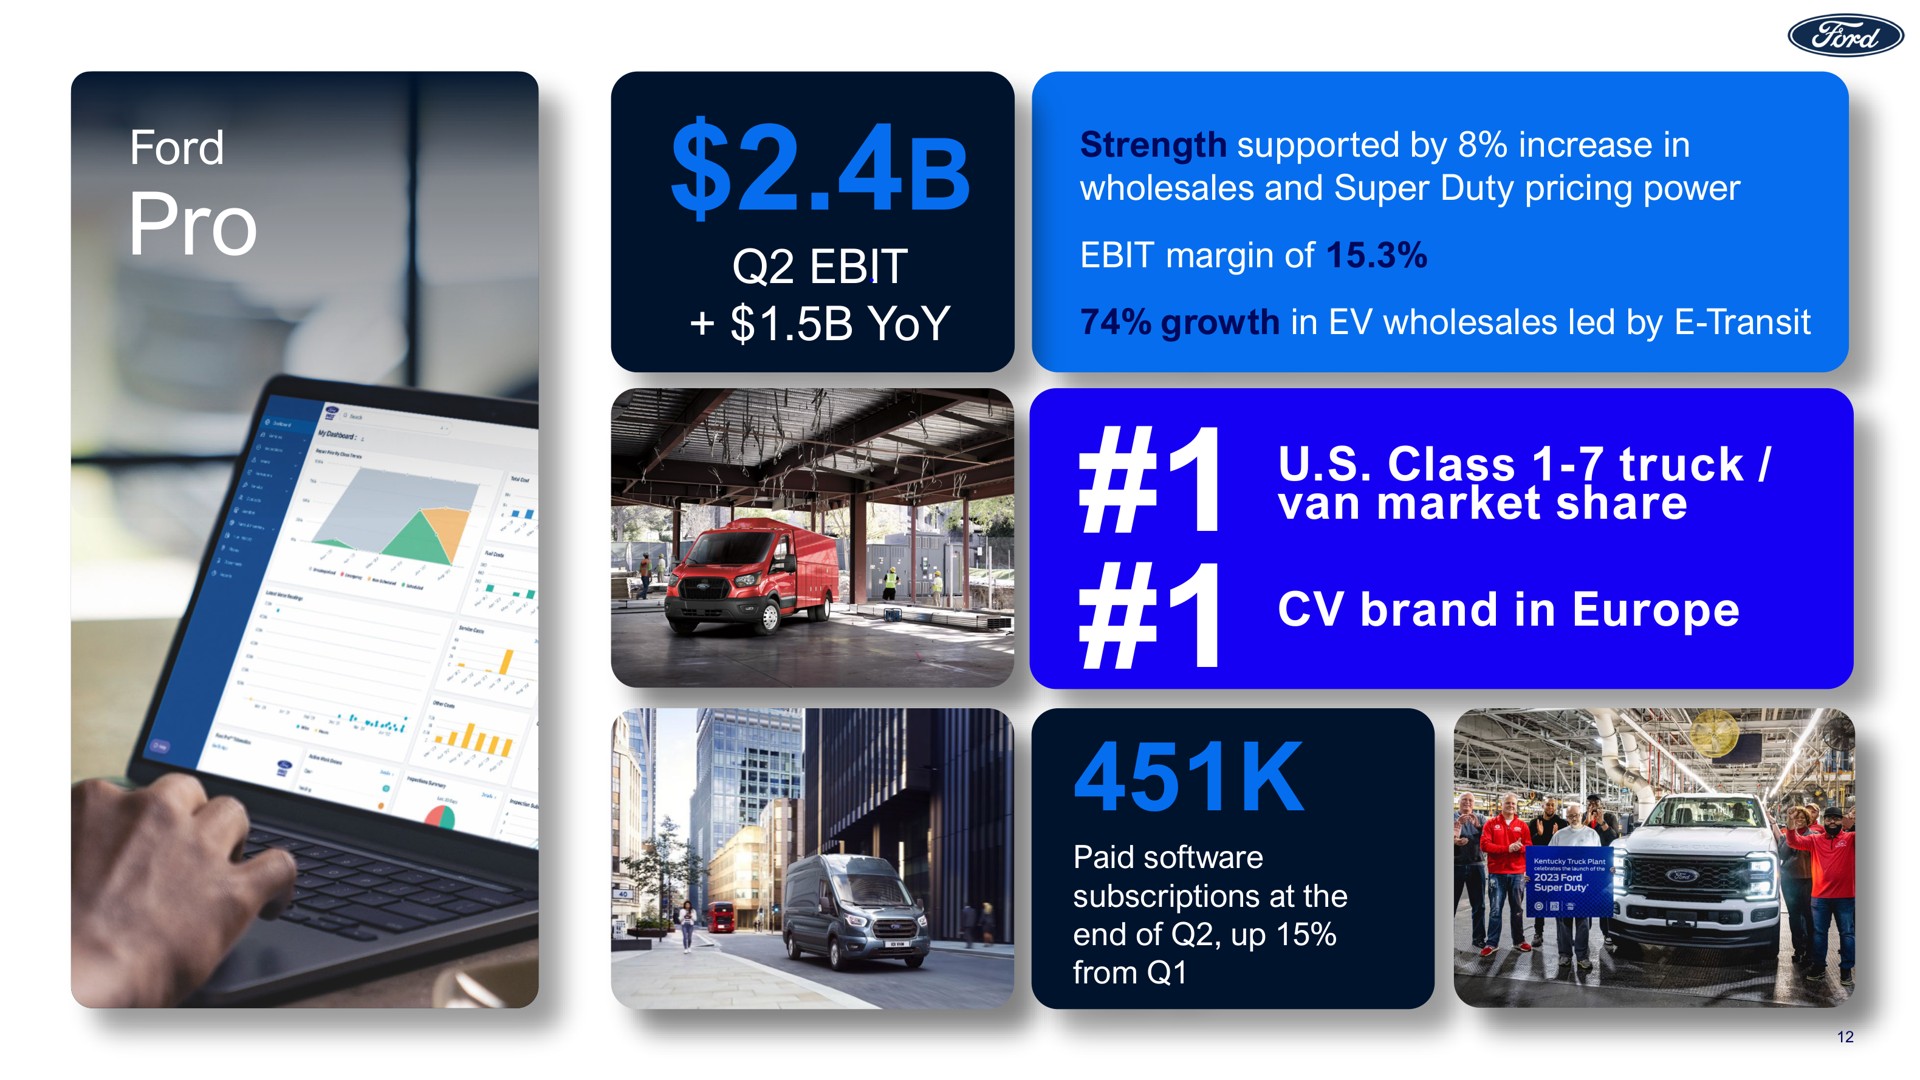 ford pro yoy strength supported by increase in wholesales and super duty pricing power margin of growth in wholesales led by transit van market share class truck brand in | Ford